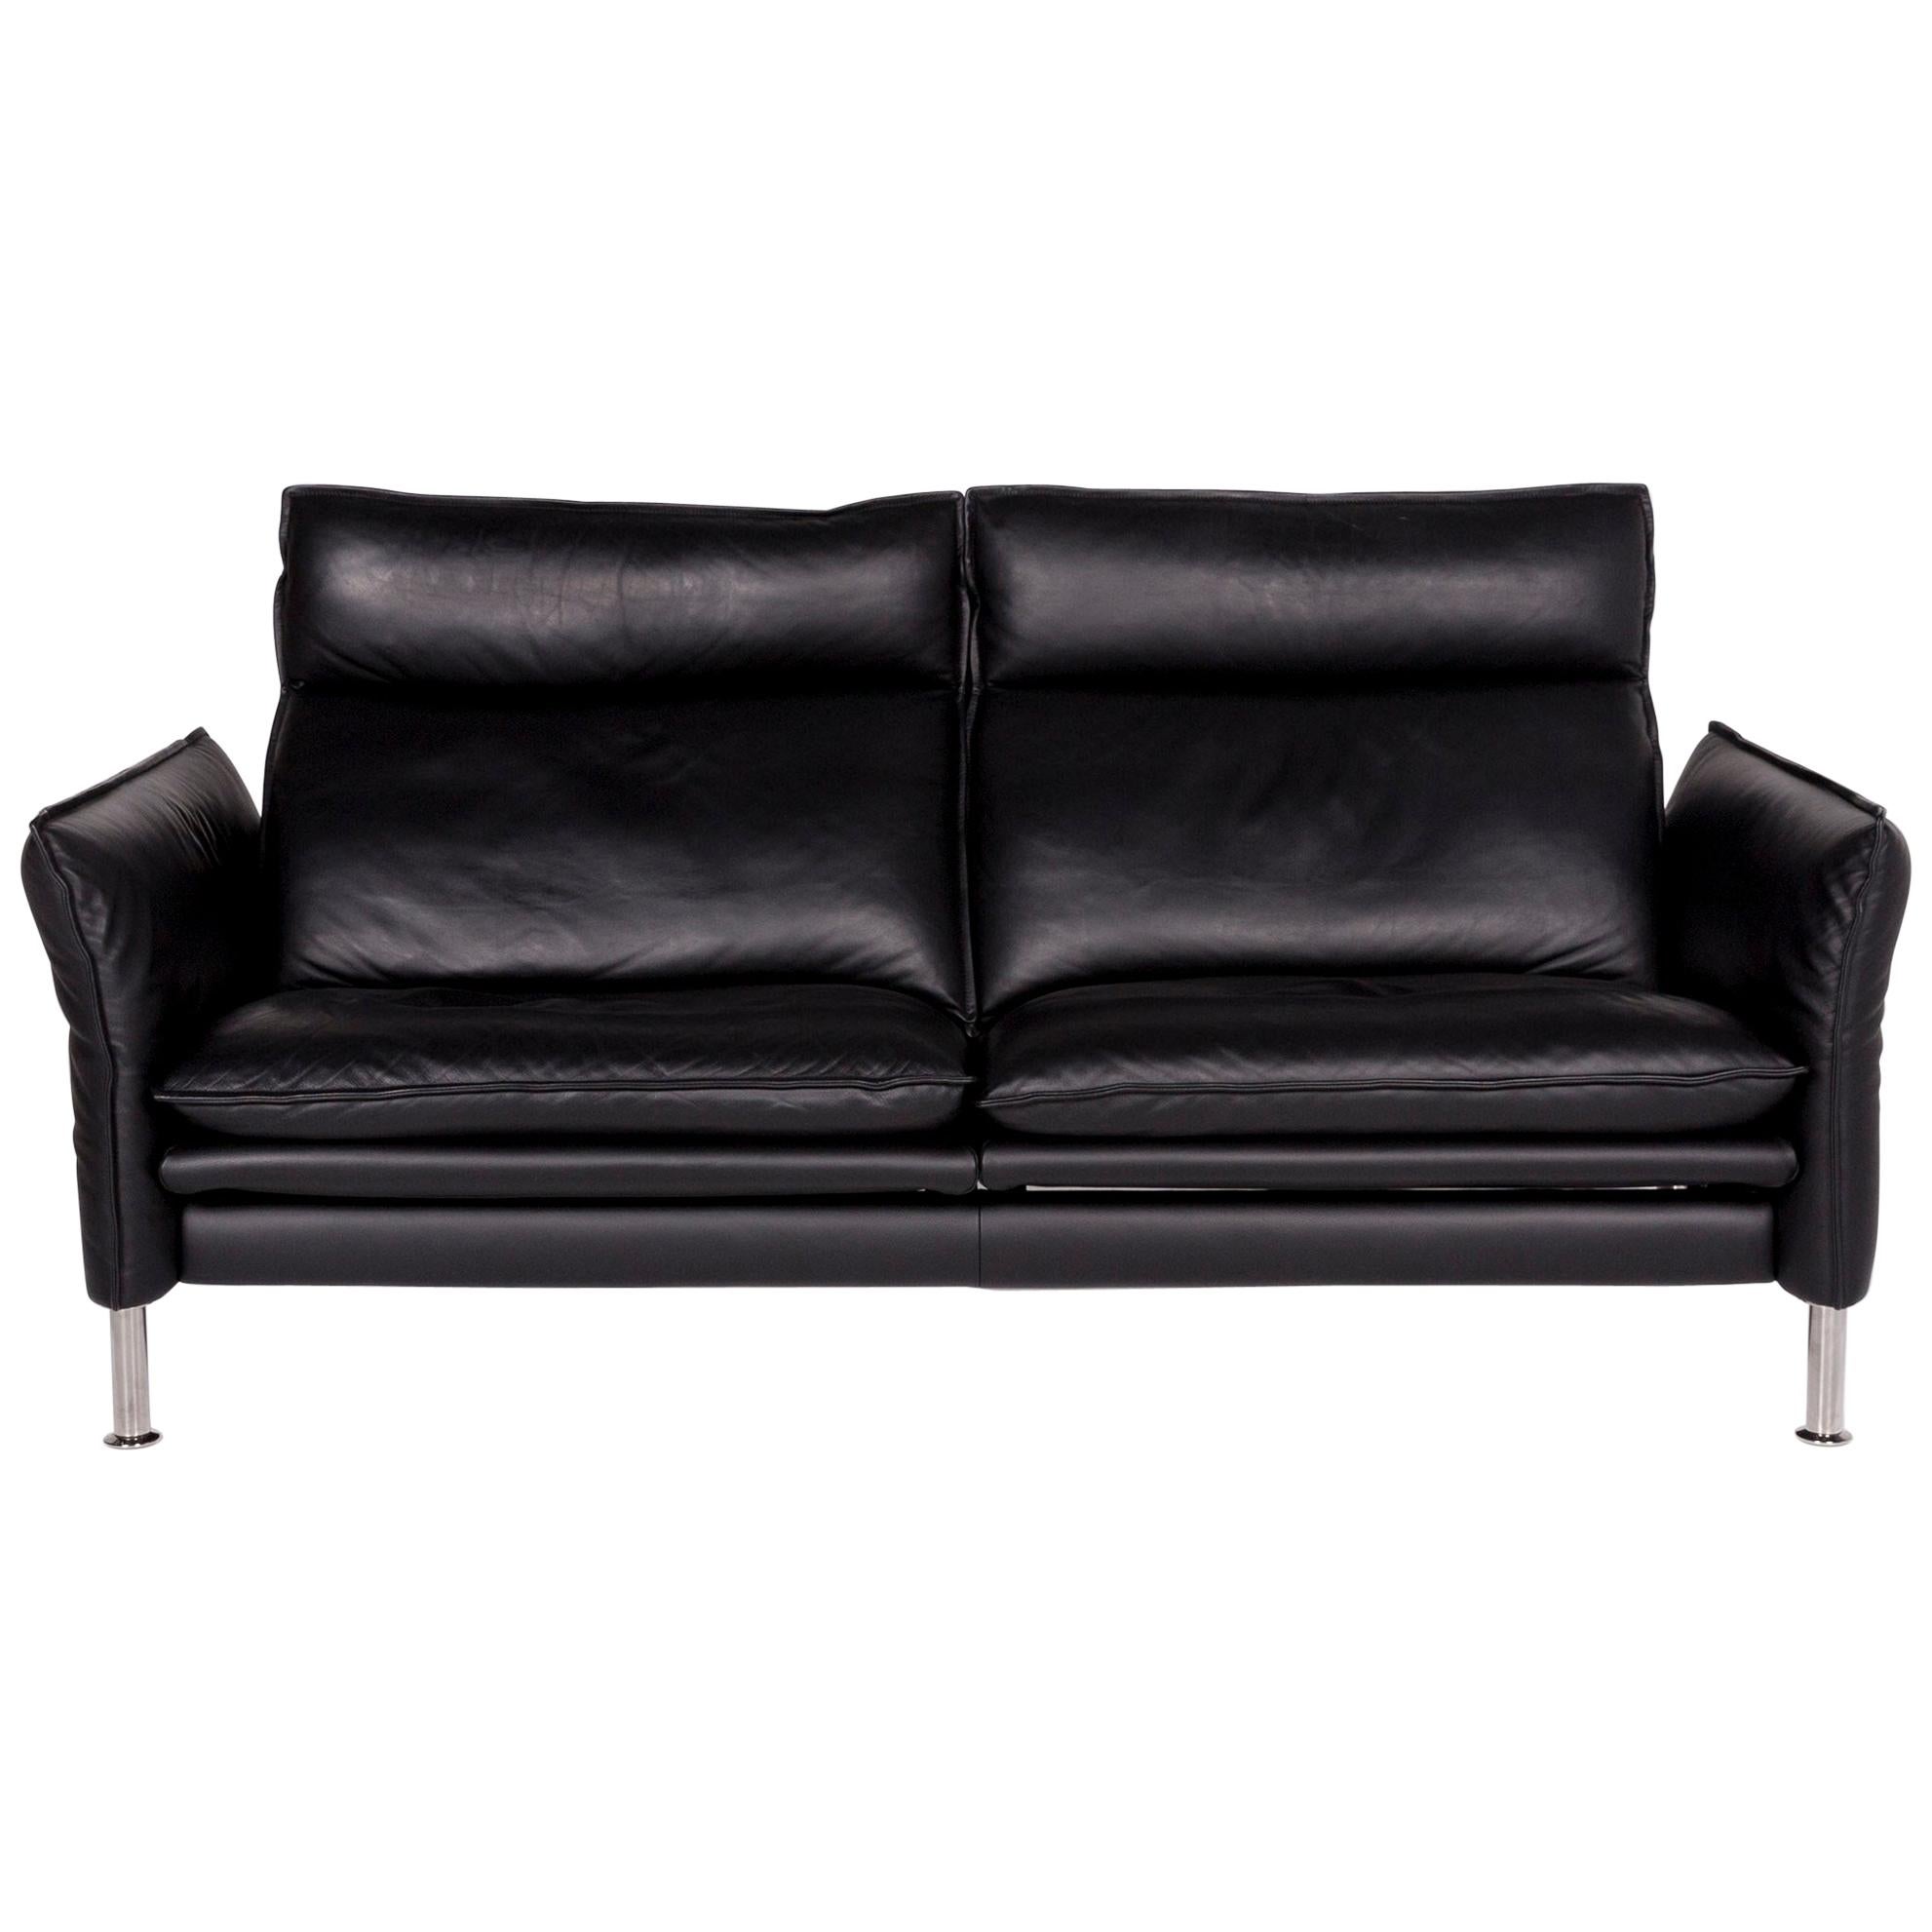 Erpo Porto Leather Sofa Black Two-Seat Relax Function Couch